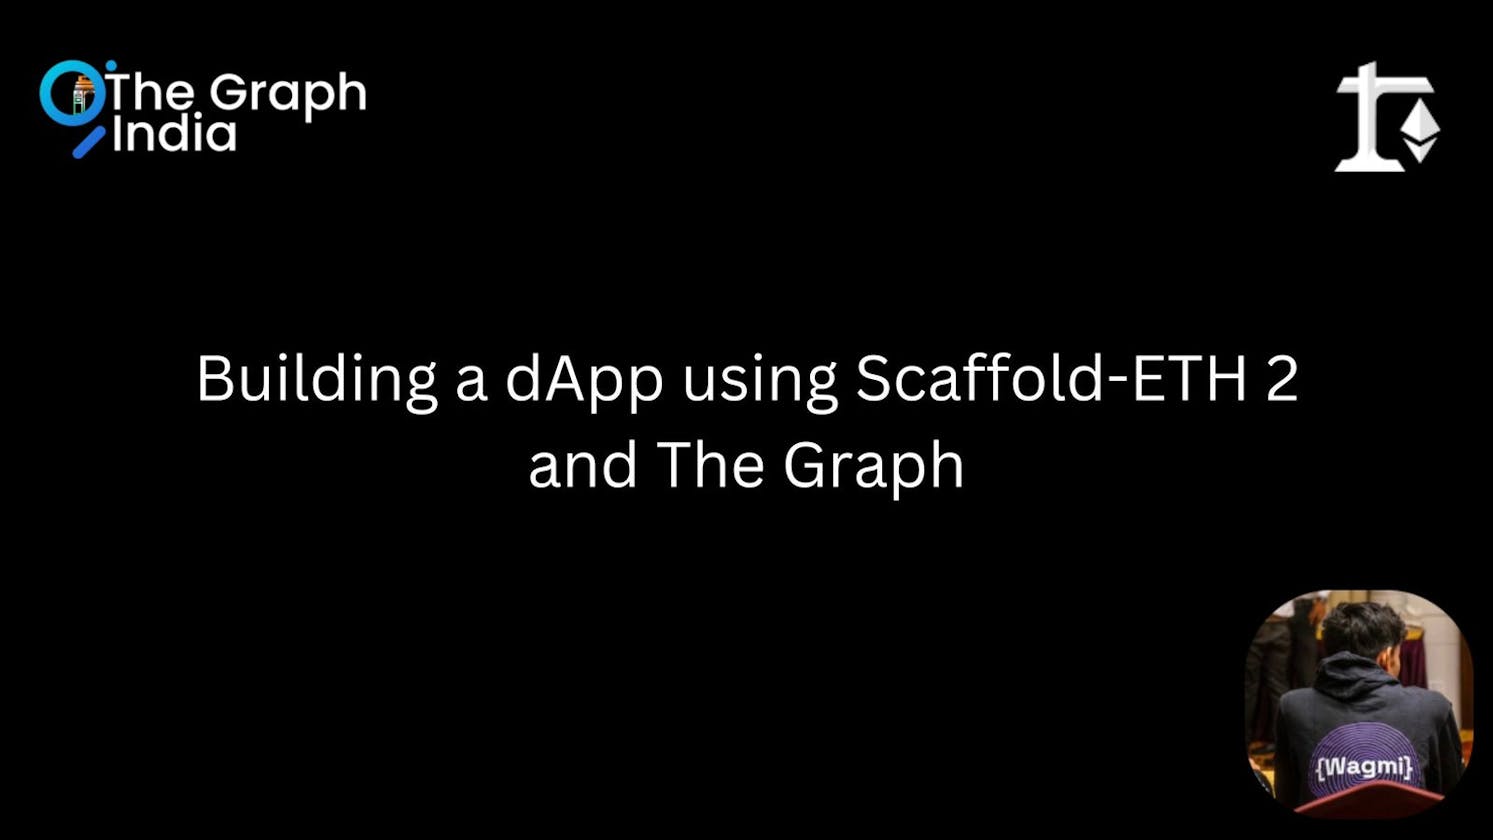 Building a dApp using Scaffold-ETH 2 and The Graph